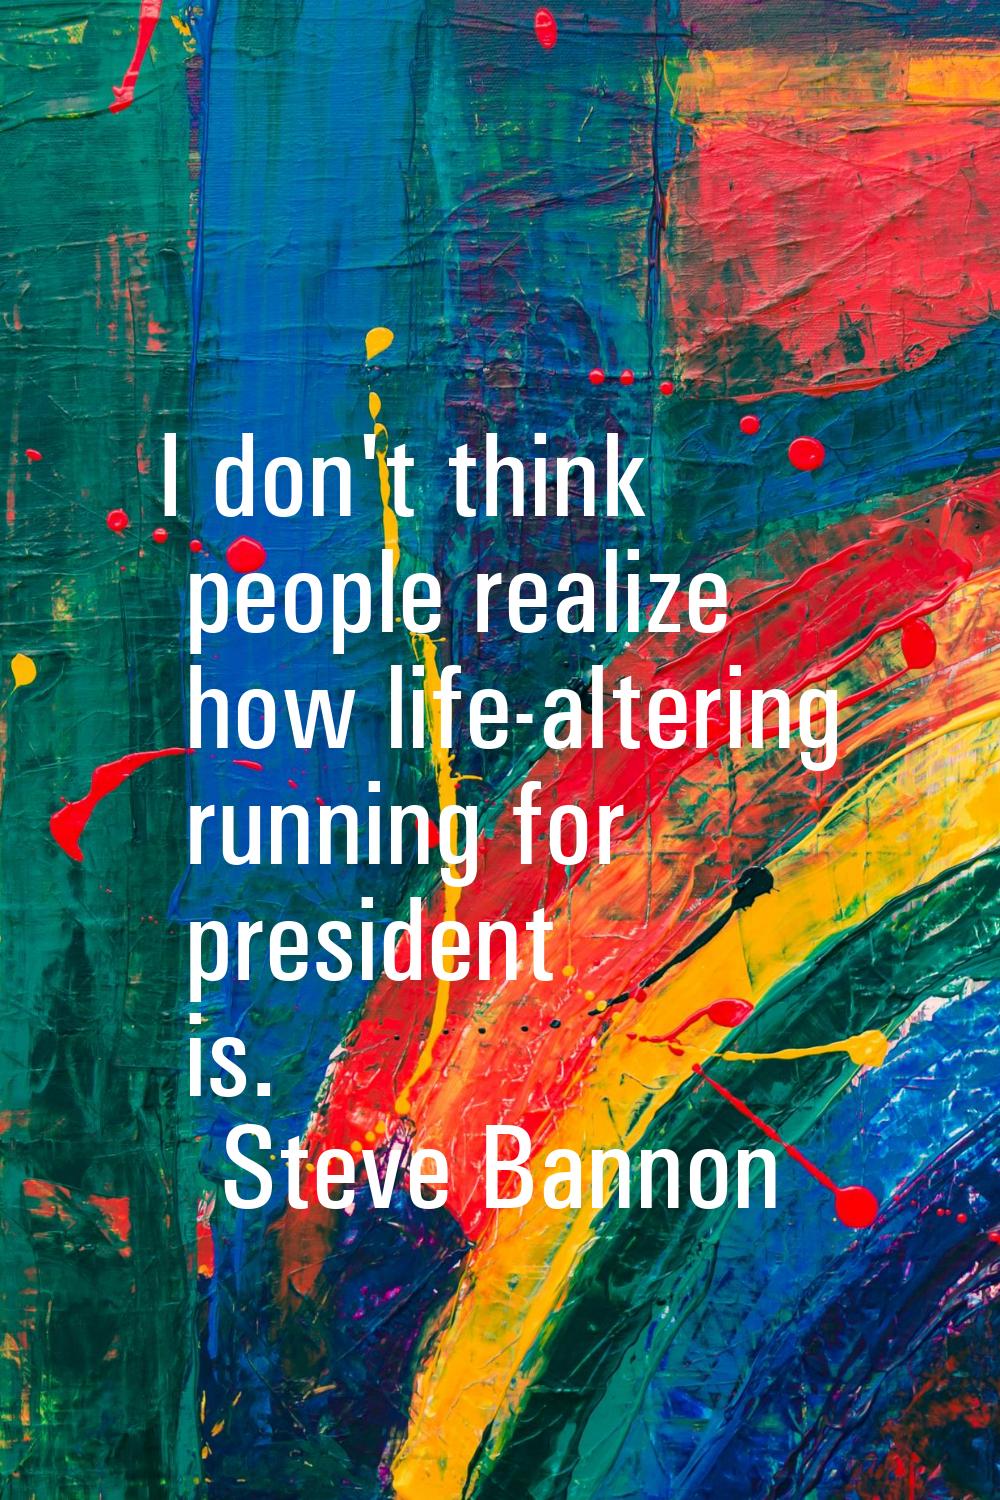 I don't think people realize how life-altering running for president is.